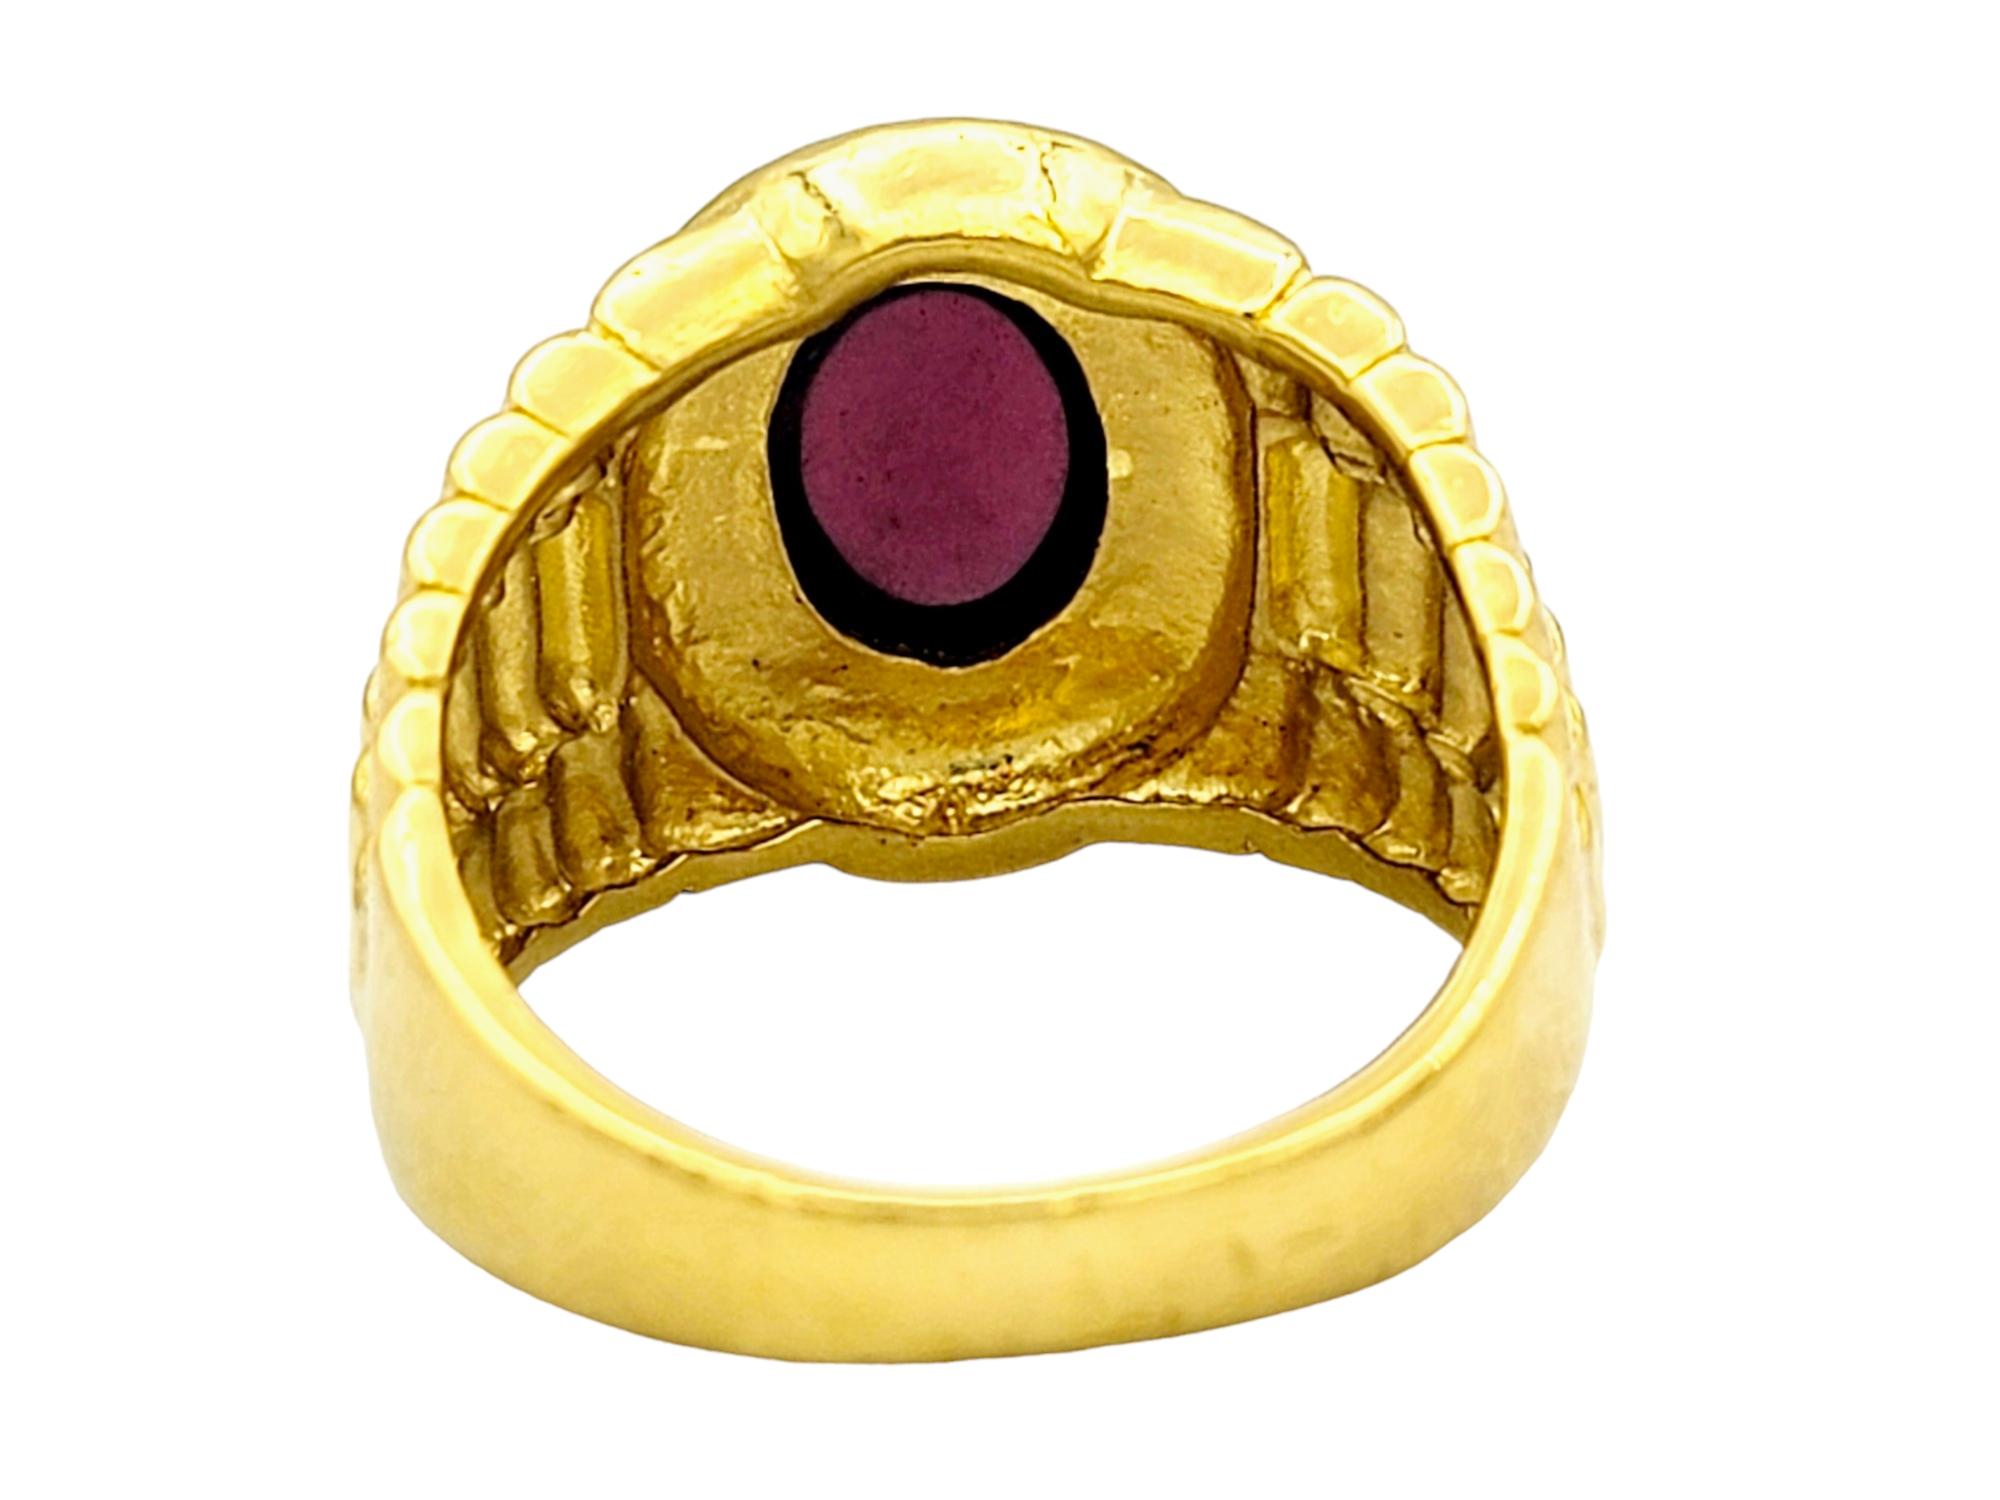 Women's or Men's 2.50 Carat Oval Cabochon Garnet Solitaire Cocktail Ring in 24 Karat Yellow Gold For Sale